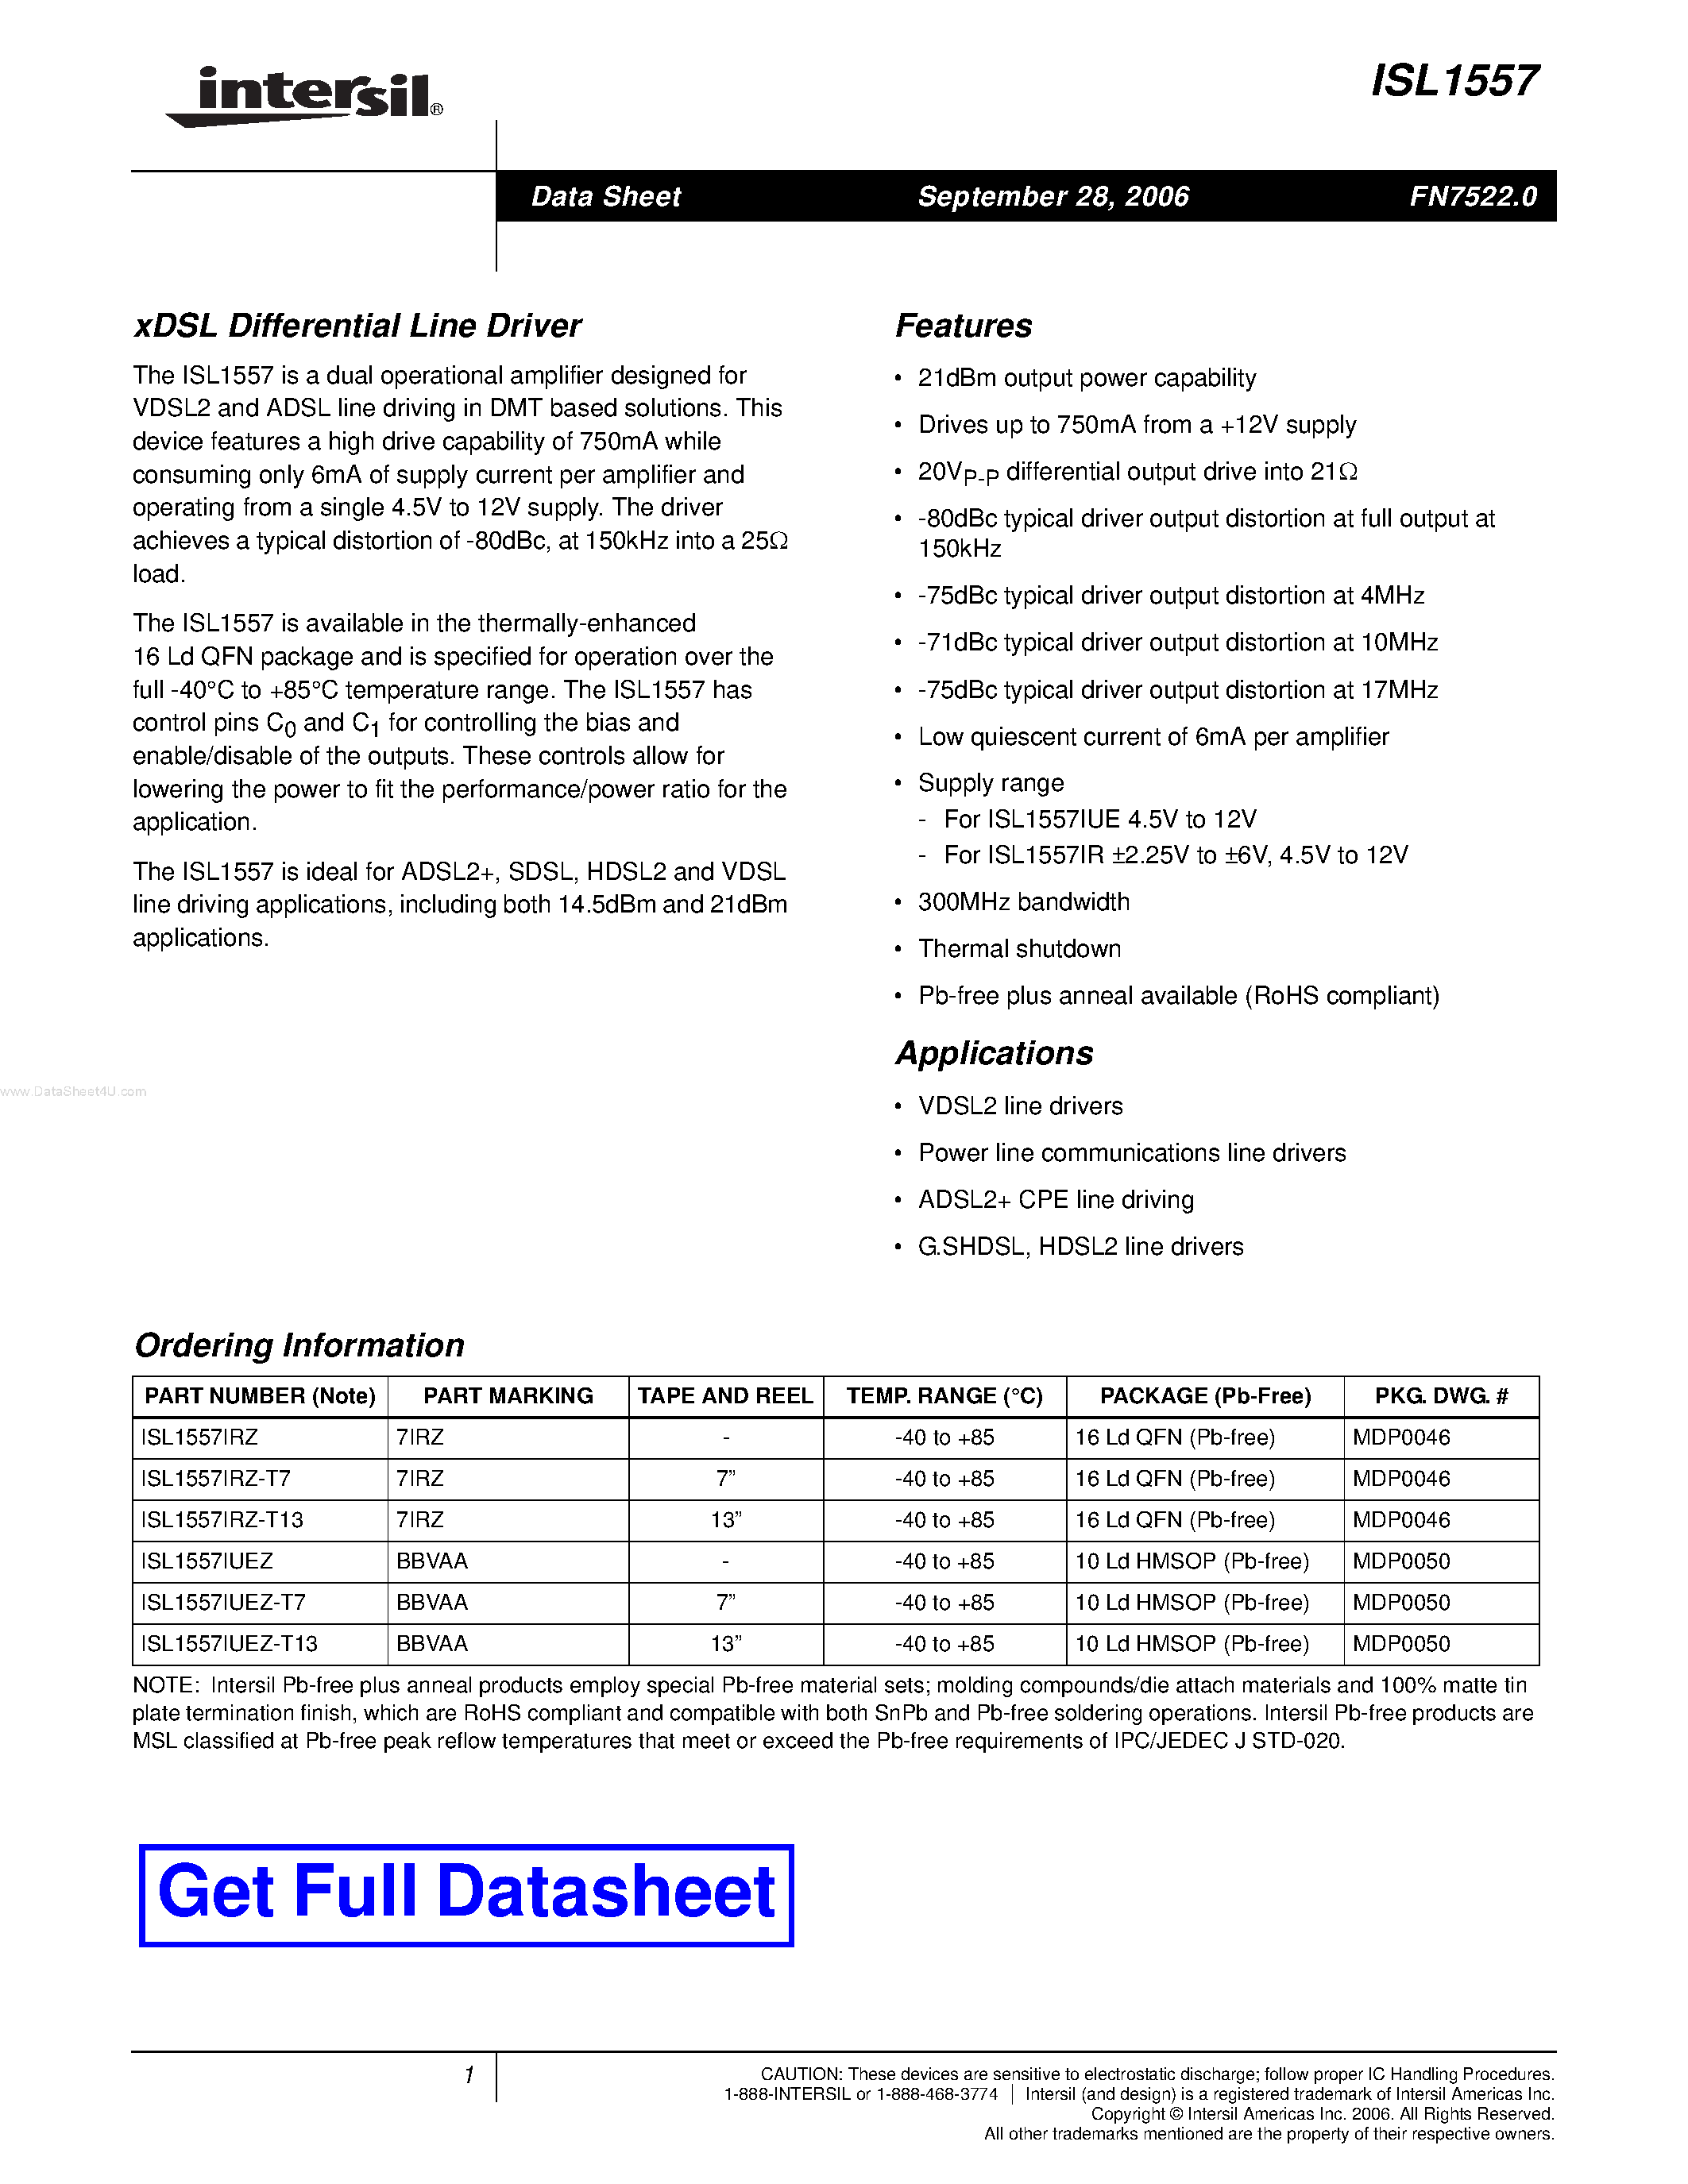 Datasheet ISL1557 - xDSL Differential Line Driver page 1